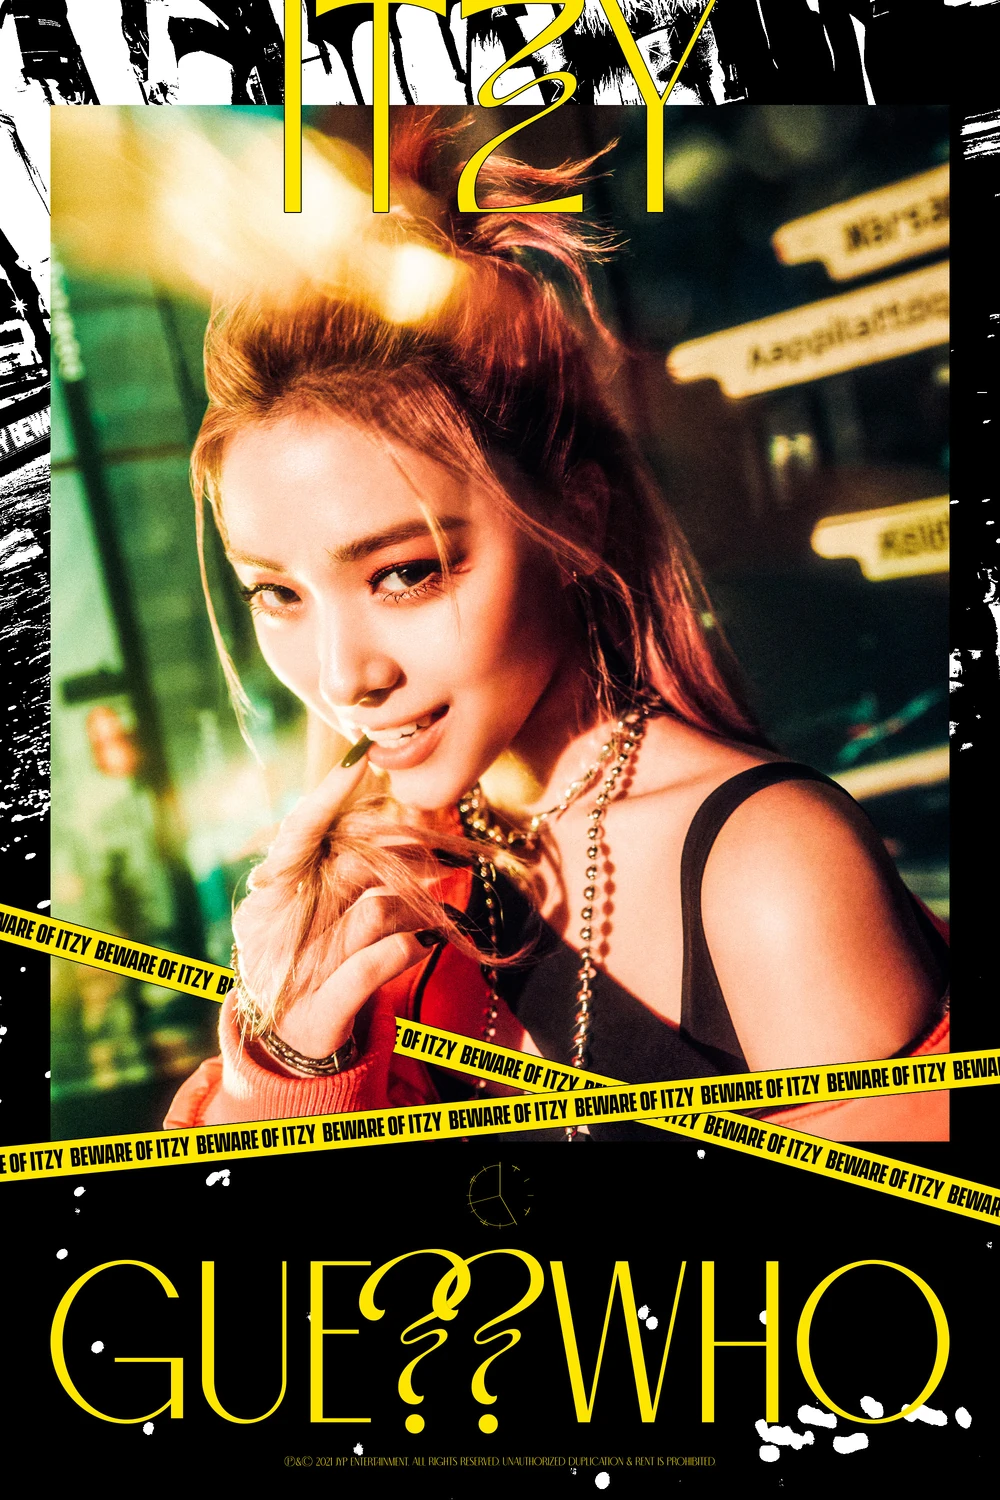 Itzy Guess Who Ryujin Concept Teaser Picture Image Photo Kpop K-Concept 1